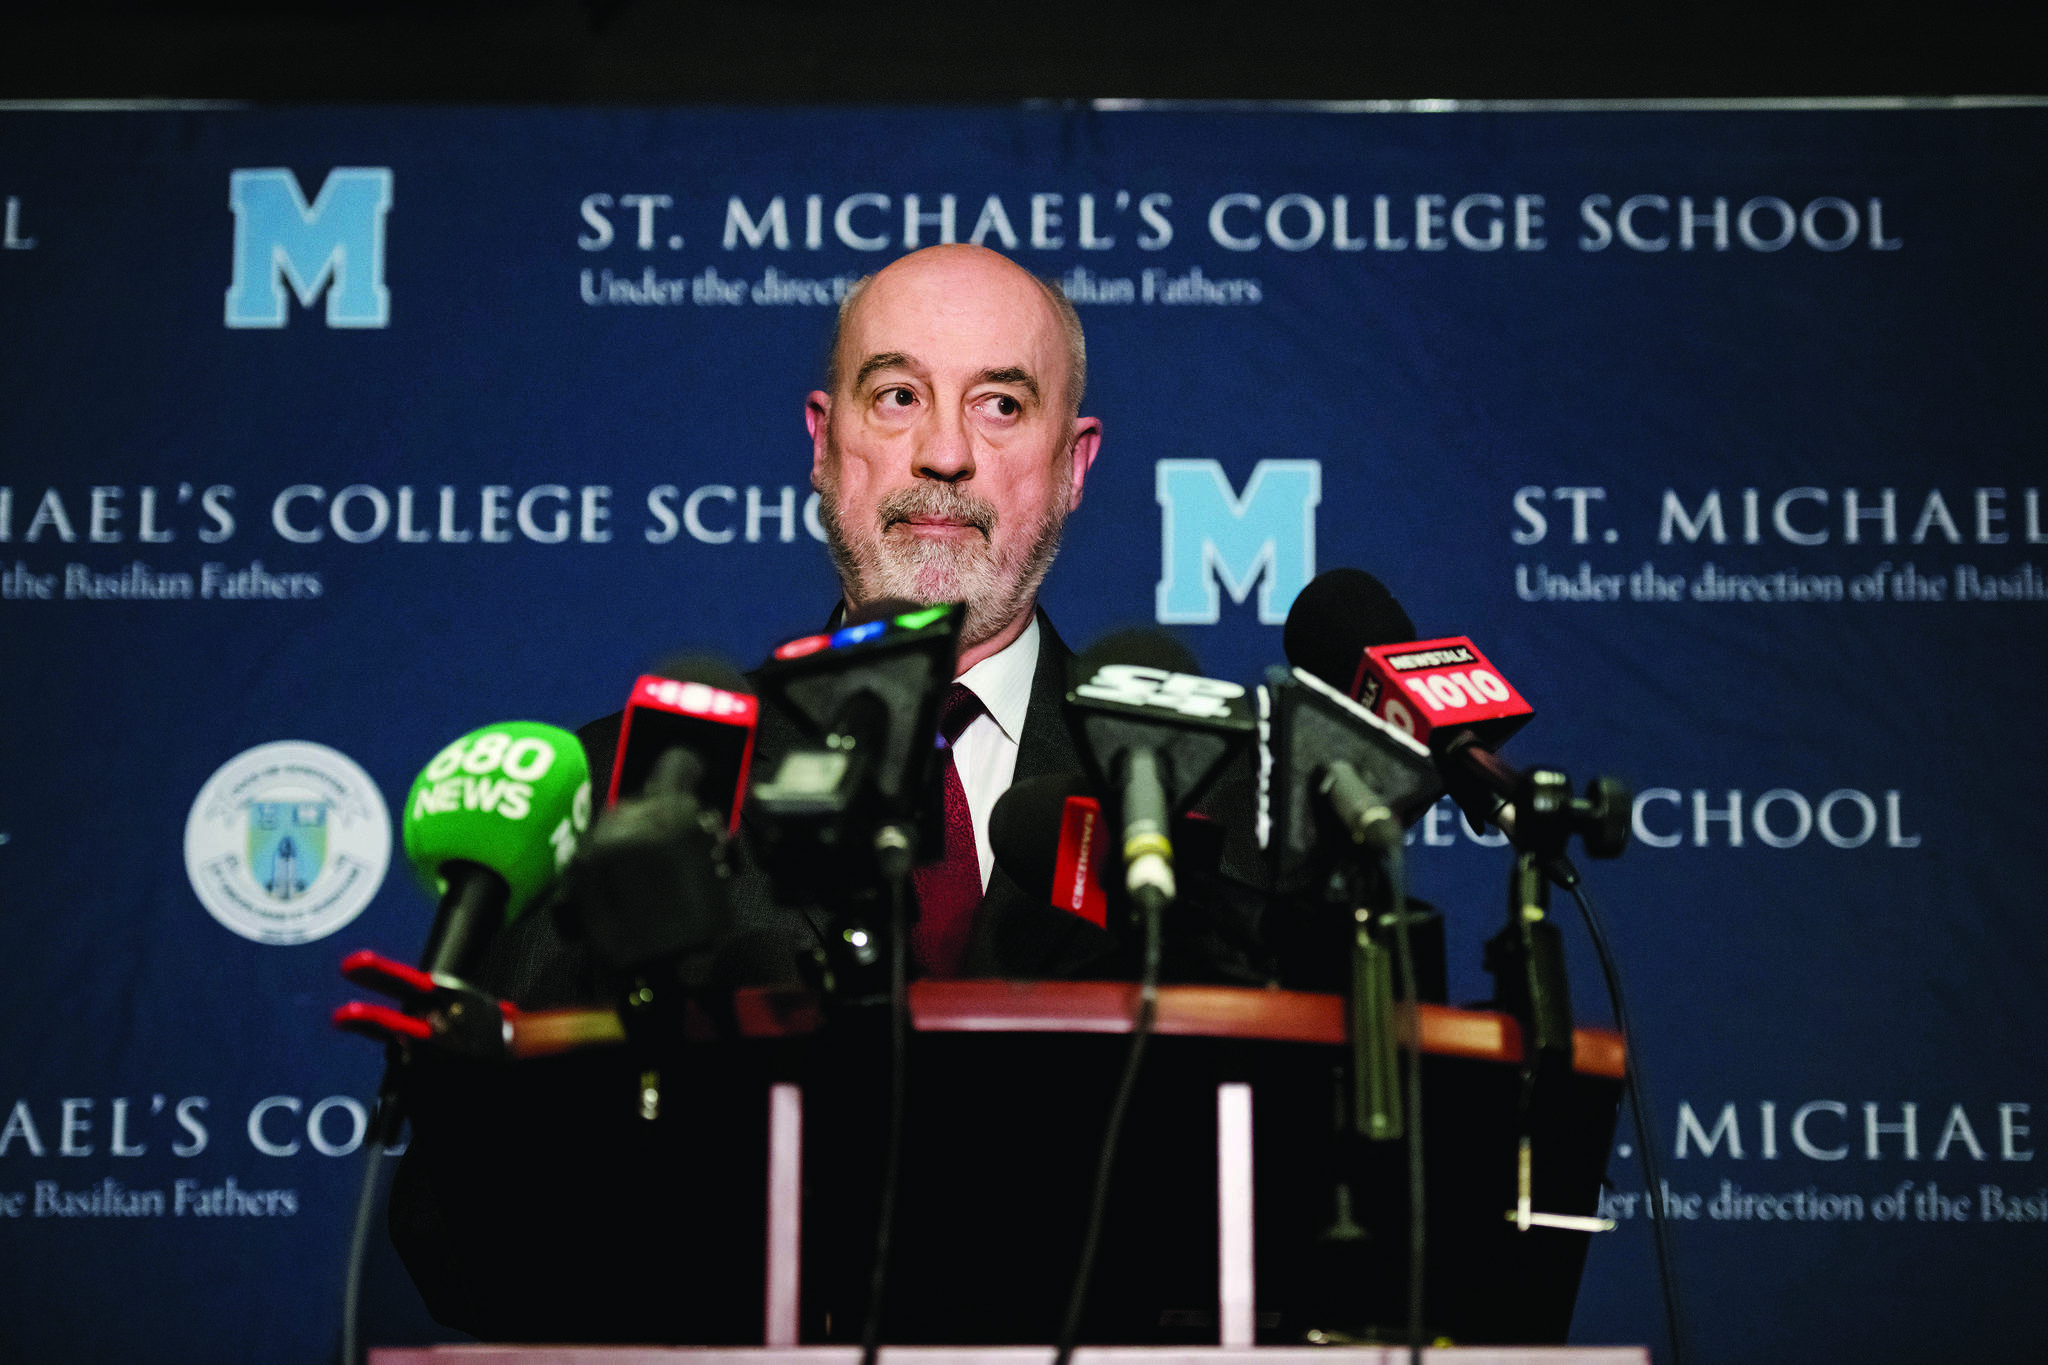 St. Michael’s College School principal Gregory Reeves, speaks to reporters at the school in Toronto, Monday, Nov. 19, 2018. (Christopher Katsarov/The Canadian Press)